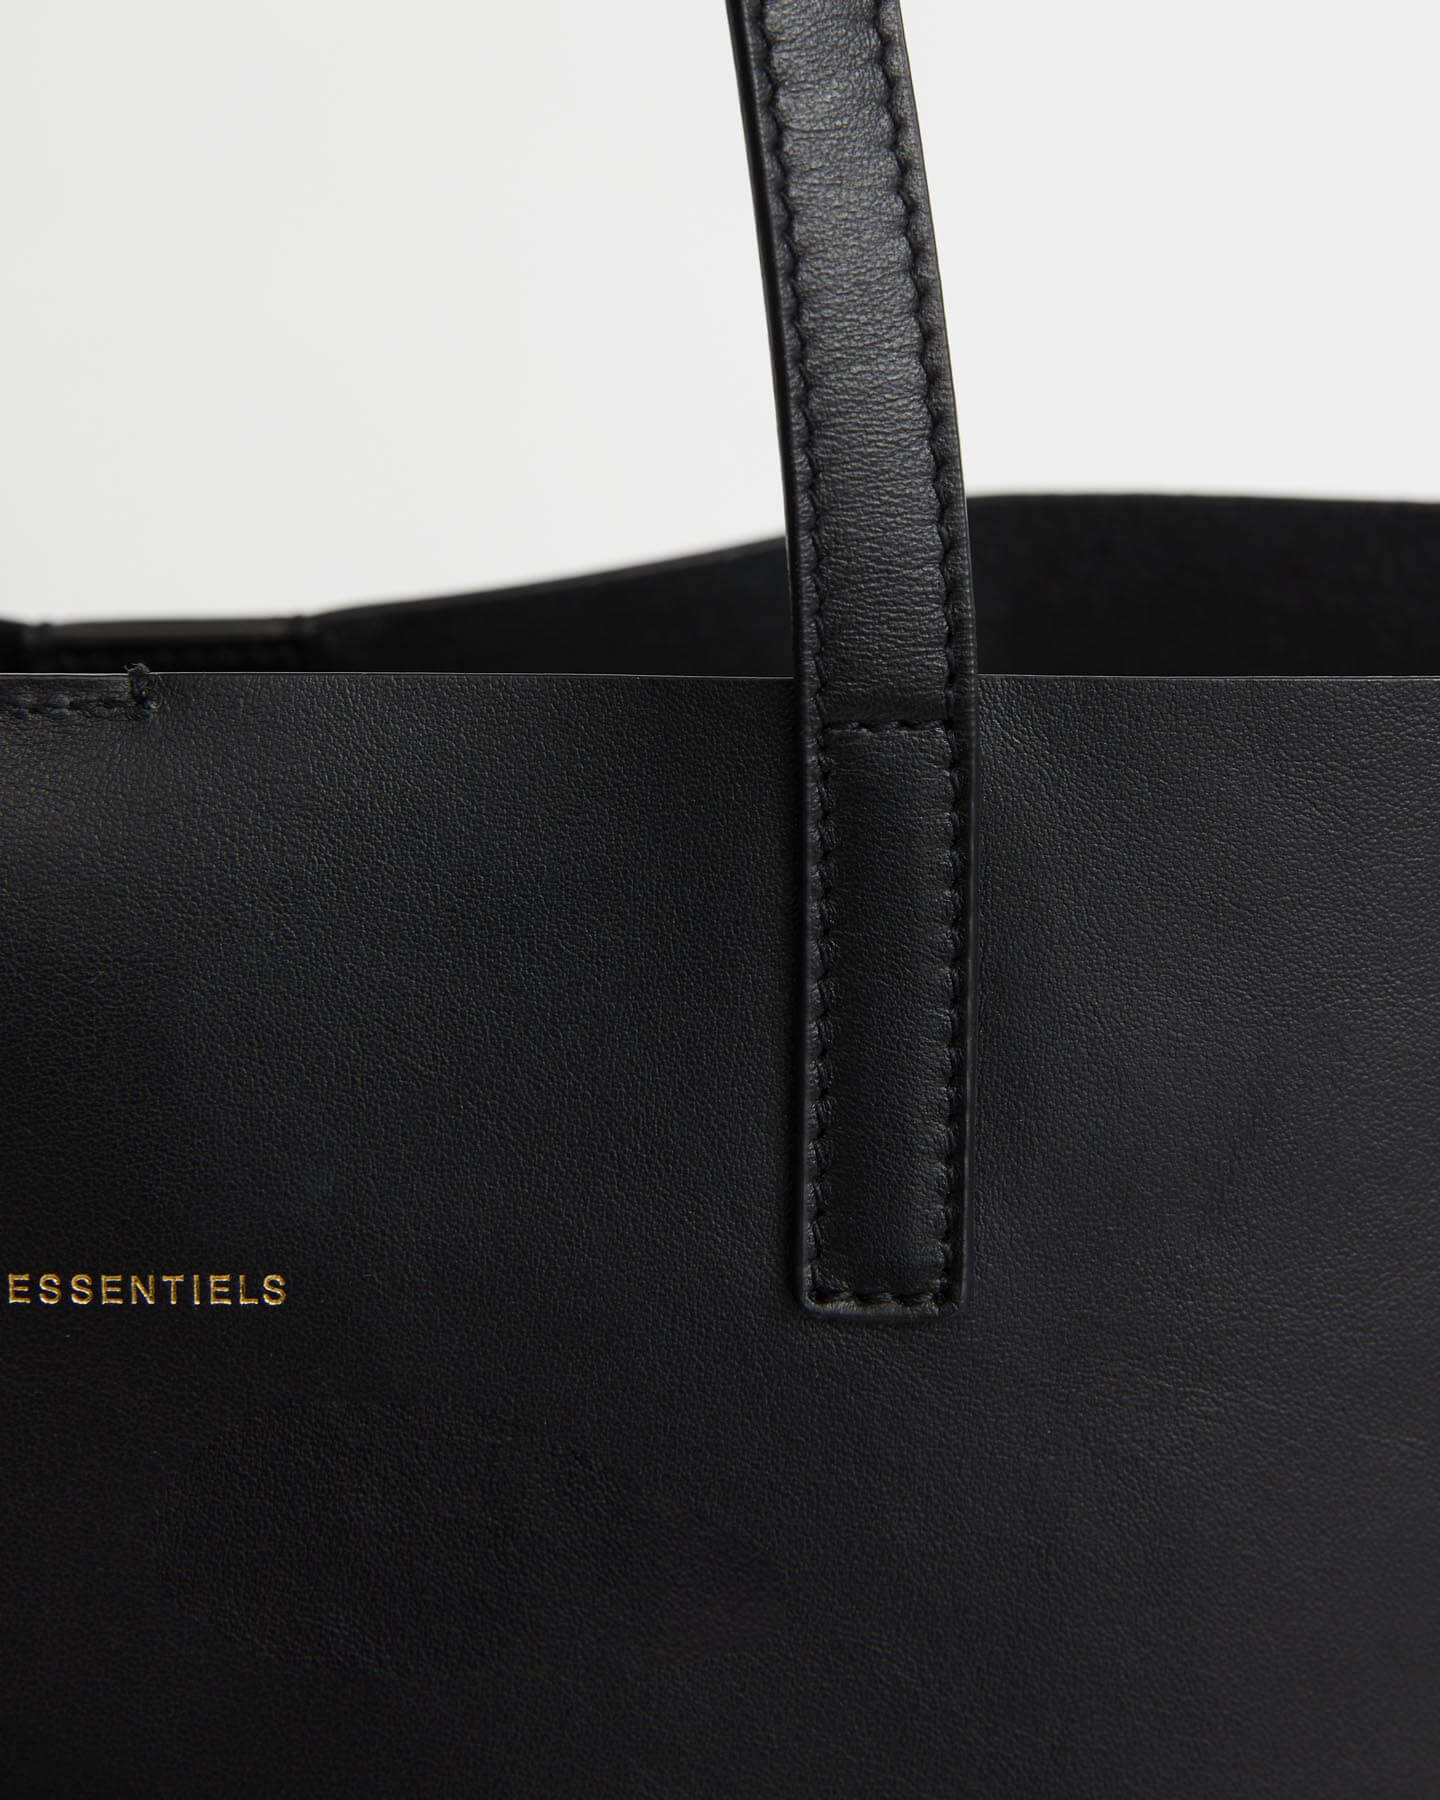 Lectoure Vertical leather tote